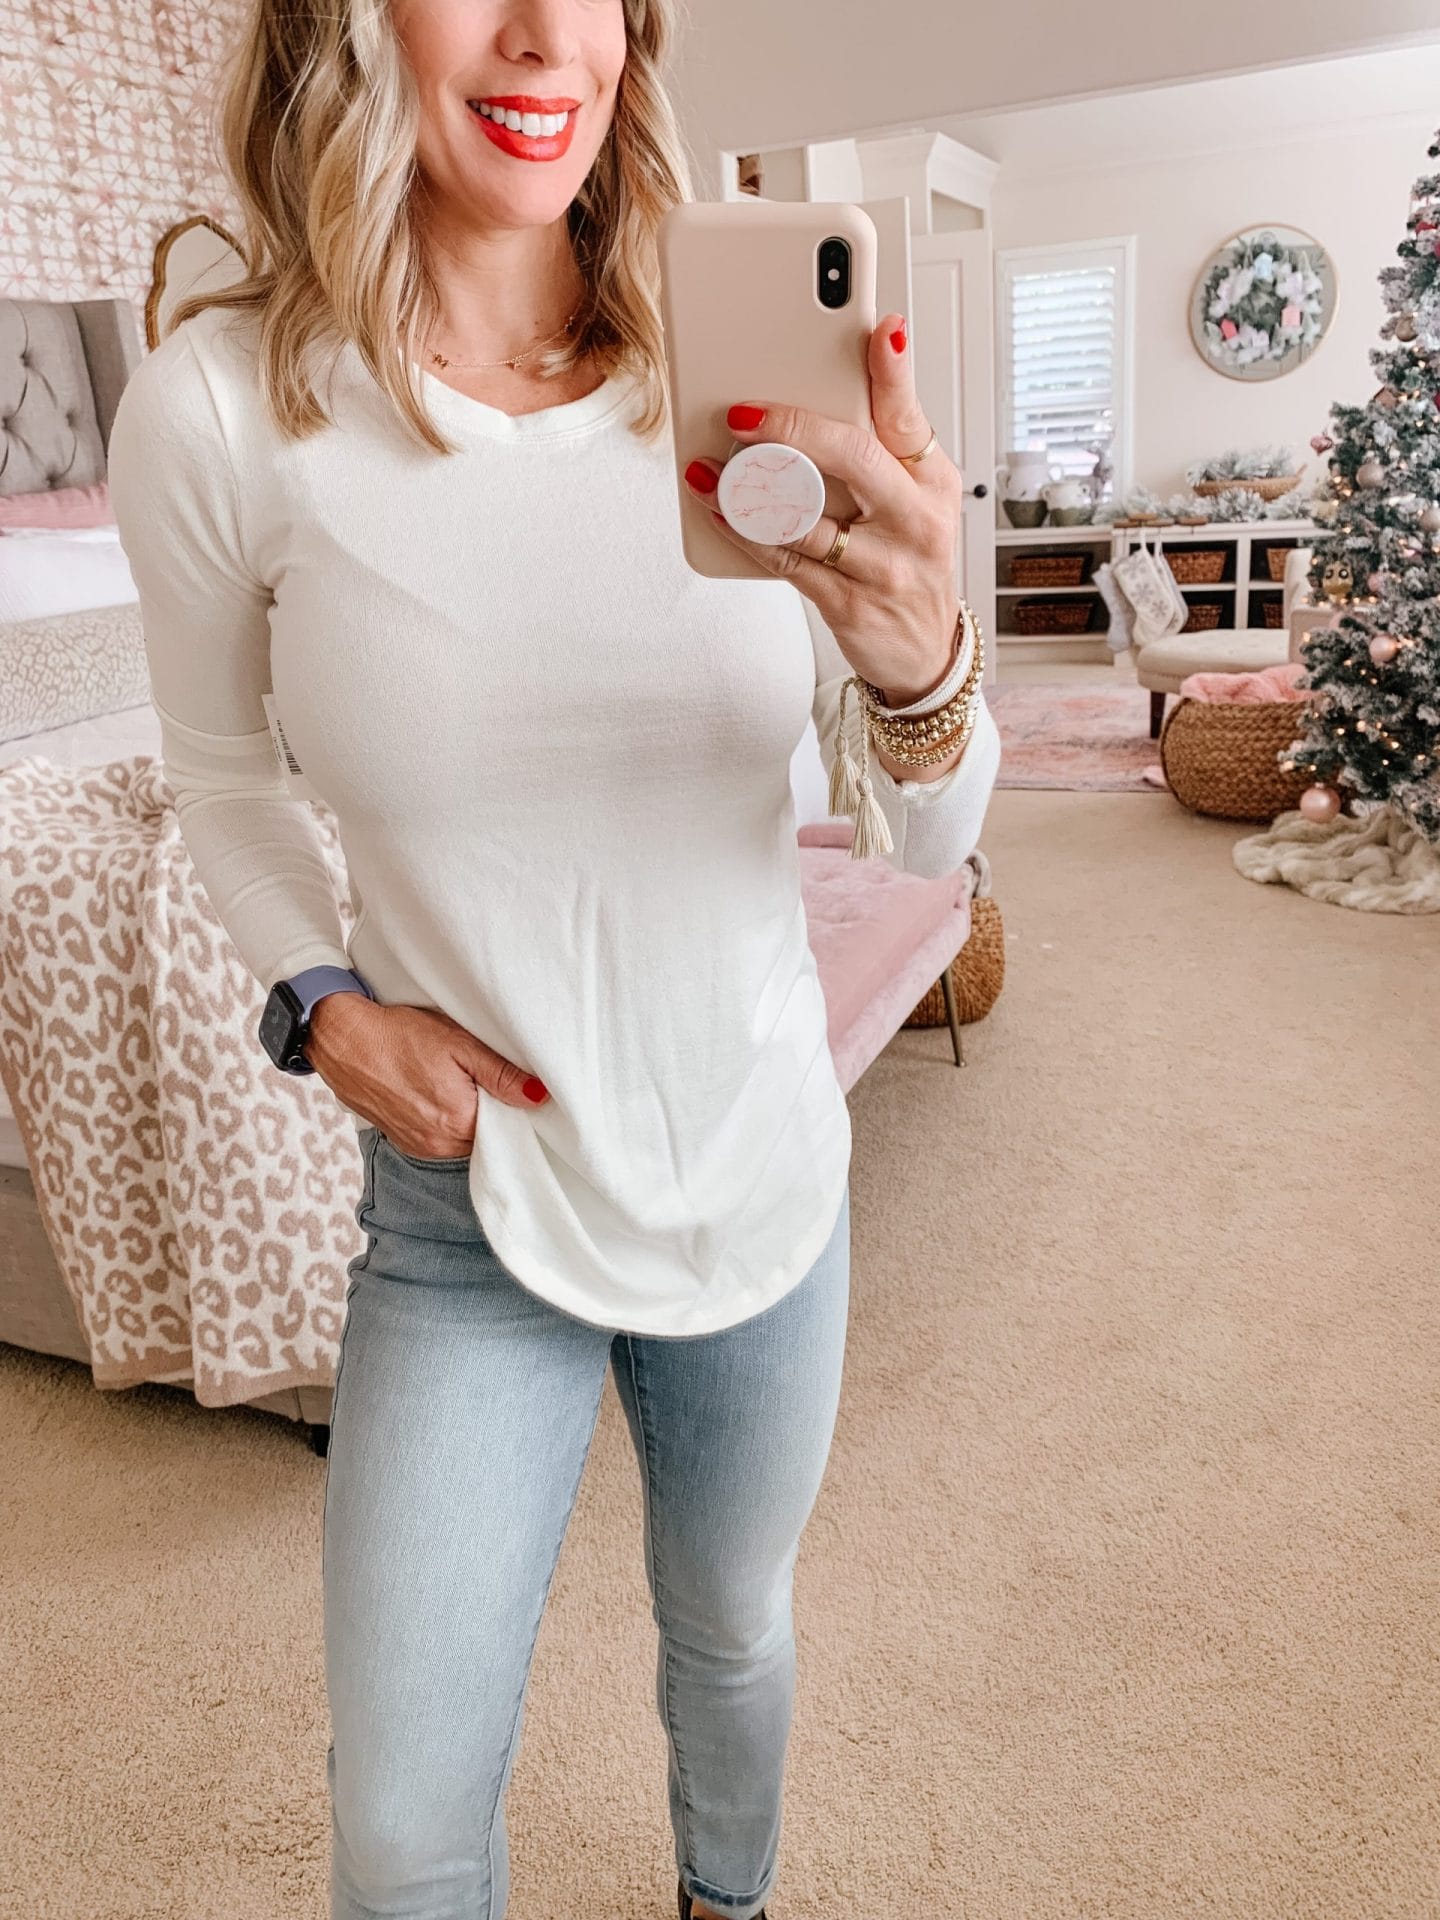 Amazon Fashion Finds, Crew Neck Tee, Jeans, Booties 